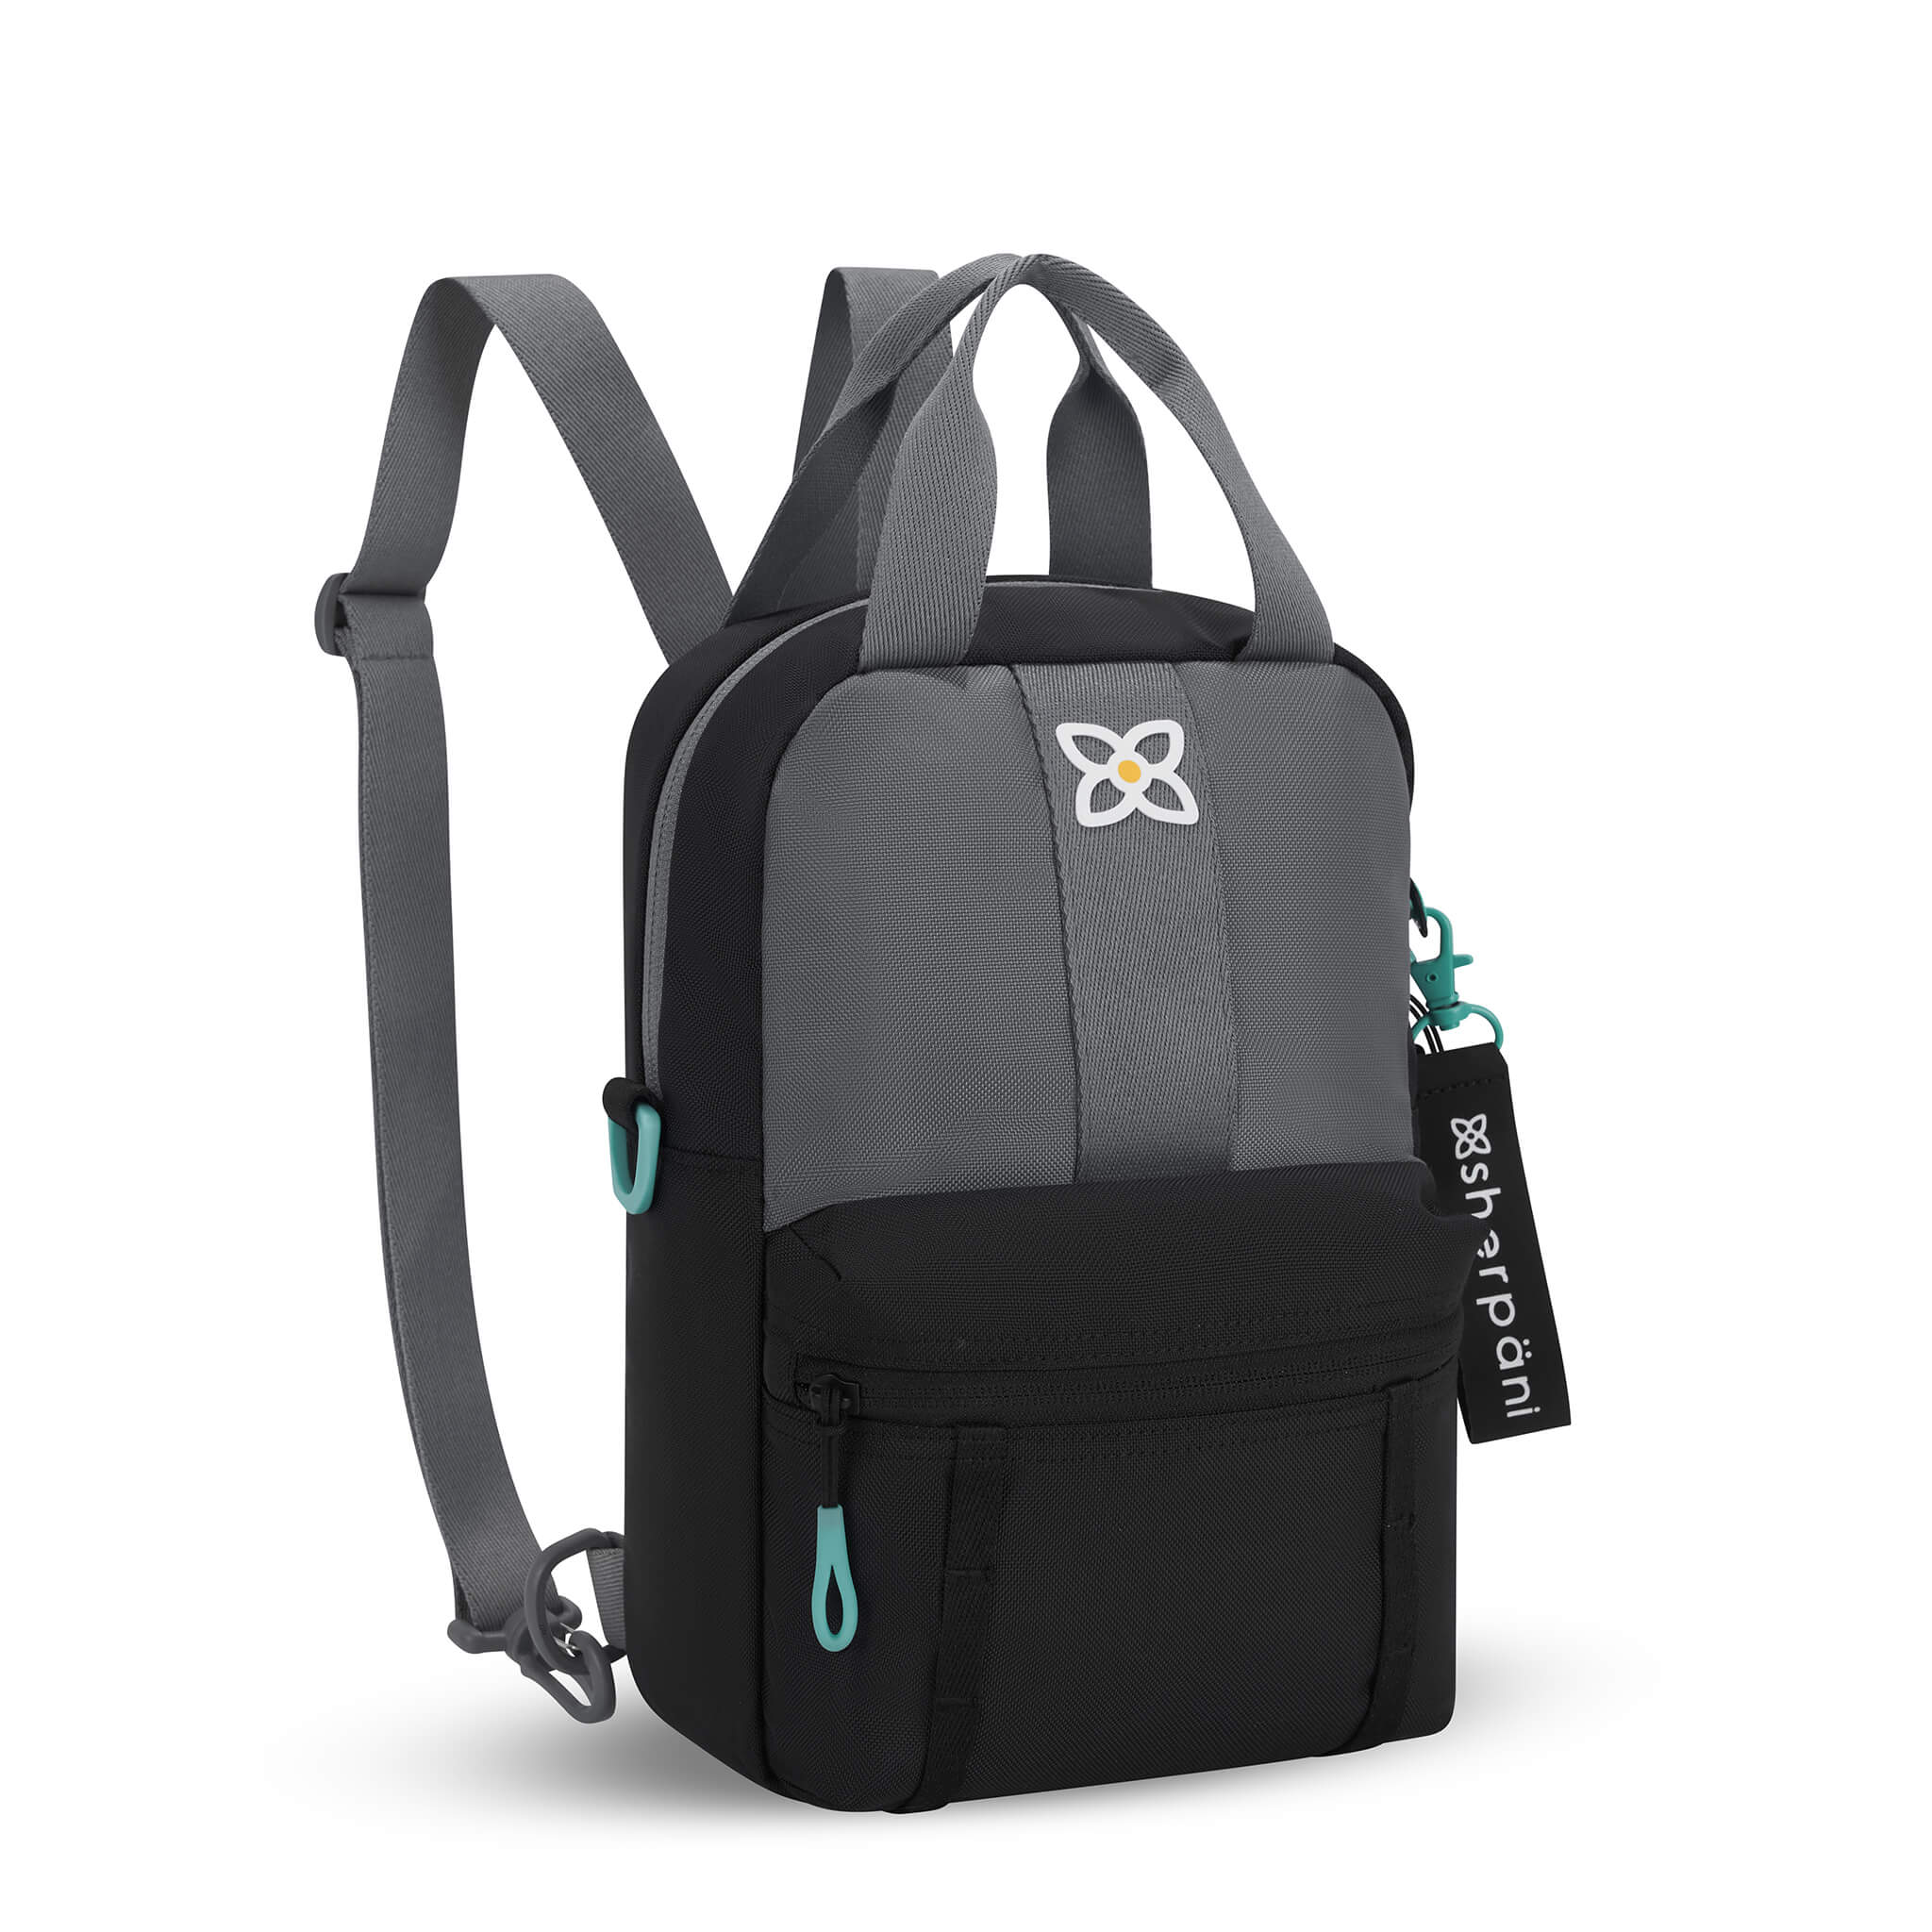 Angled front view of Sherpani mini backpack the Logan in Moonstone. The bag is black and gray with aqua accents. The Logan has fixed tote handles and adjustable backpack straps. #color_moonstone